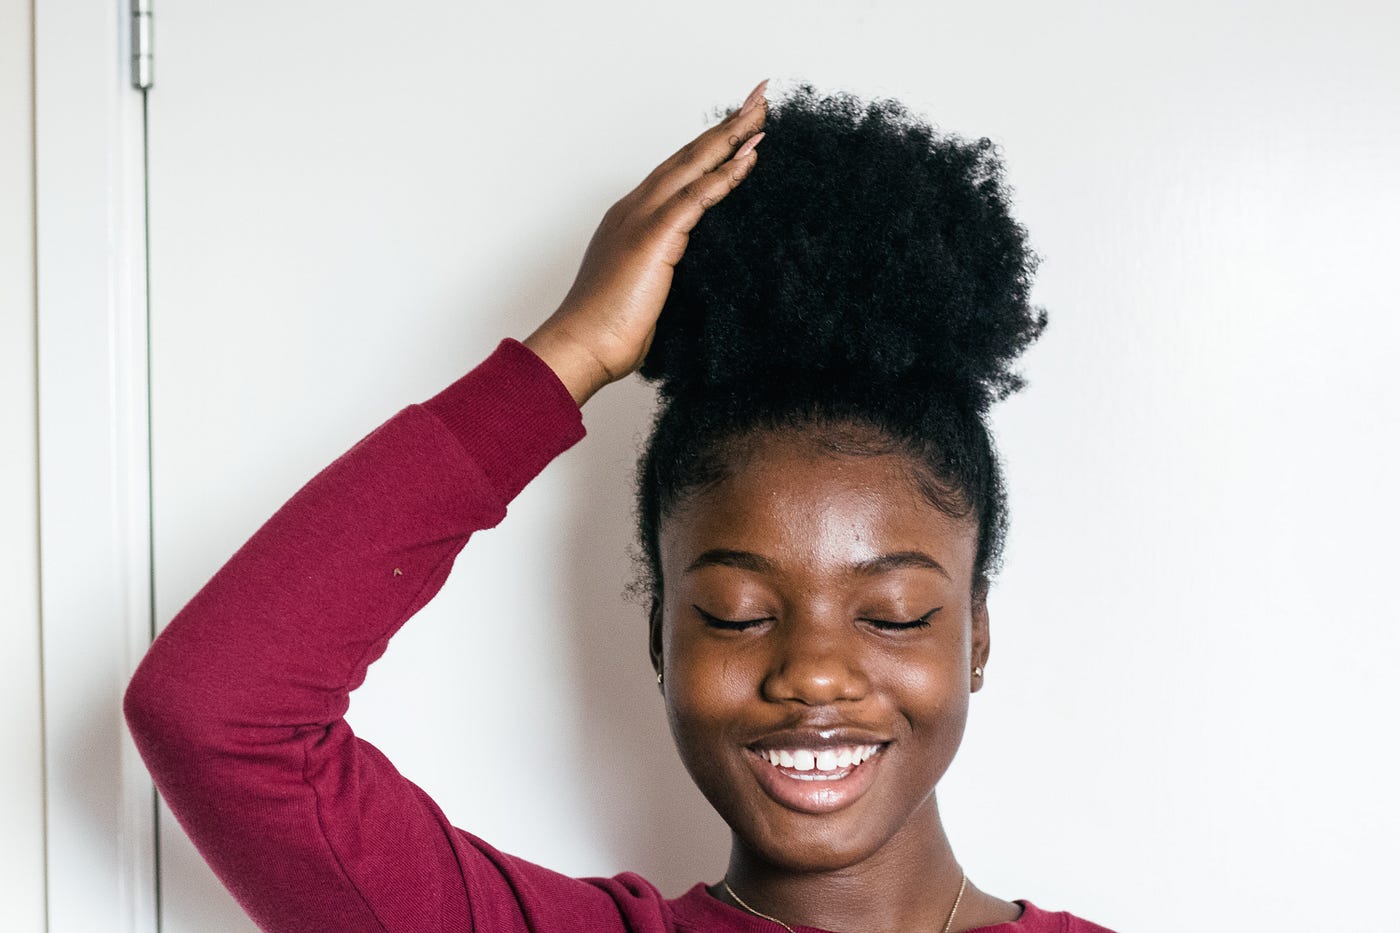 My Hair is Bomb”: Black Girls' Identities and Resistance